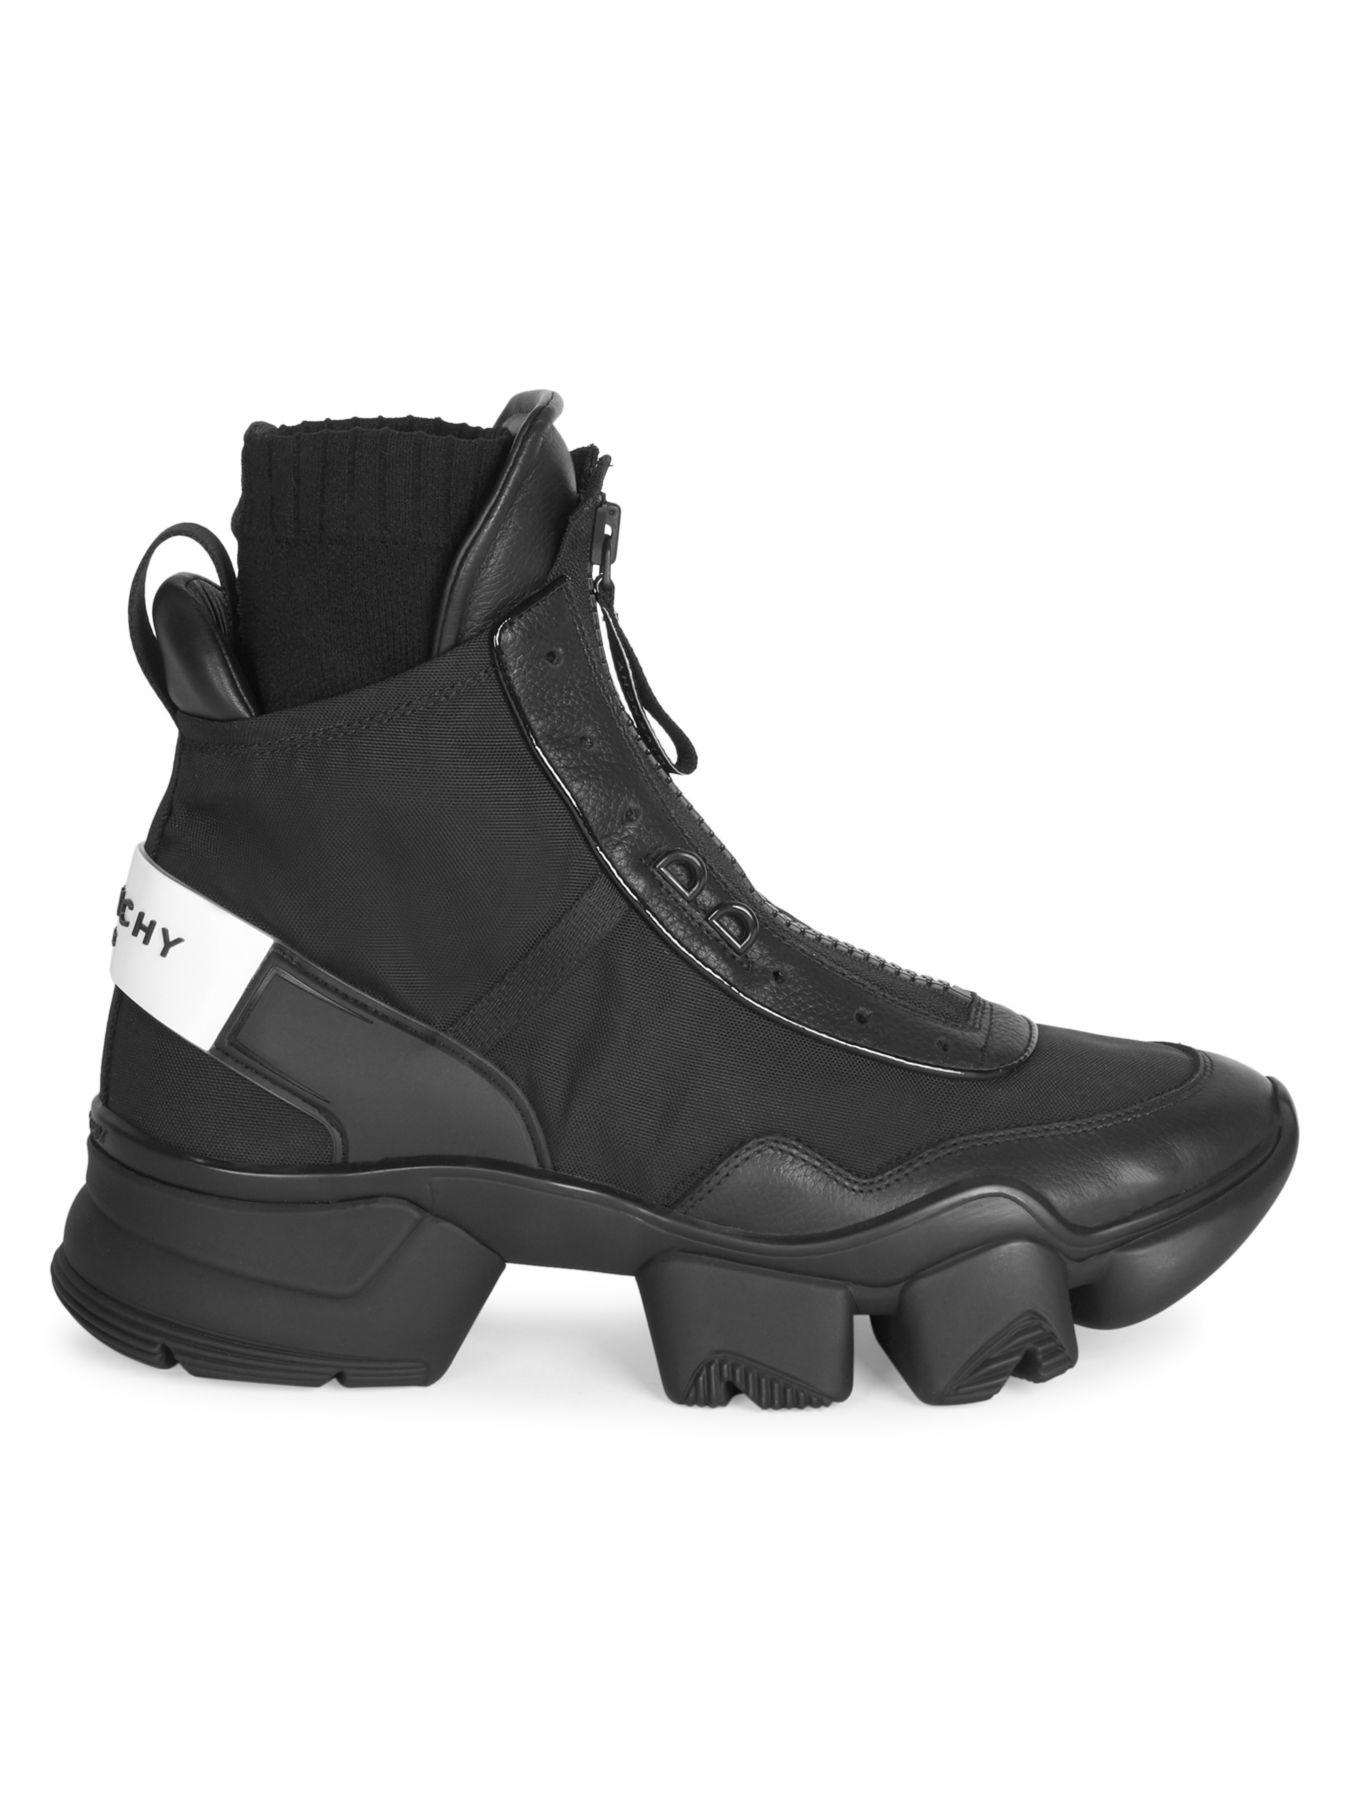 Givenchy Leather Jaw High Sneakers in Black for Men - Lyst